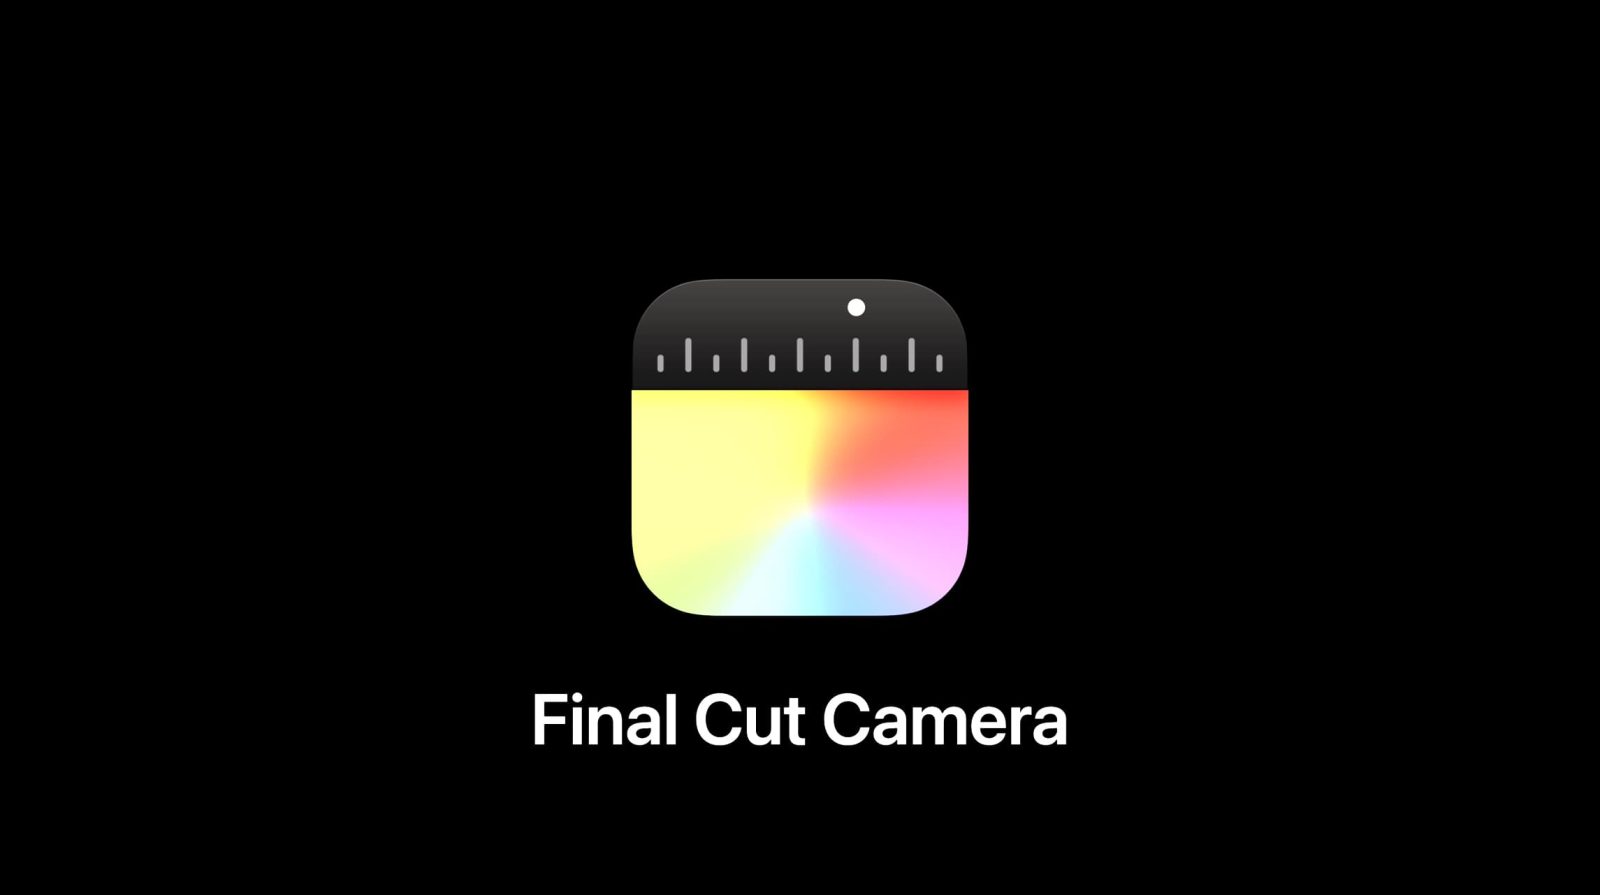 Brand new Final Cut Camera app for iPhone and iPad enables pro recording workflows